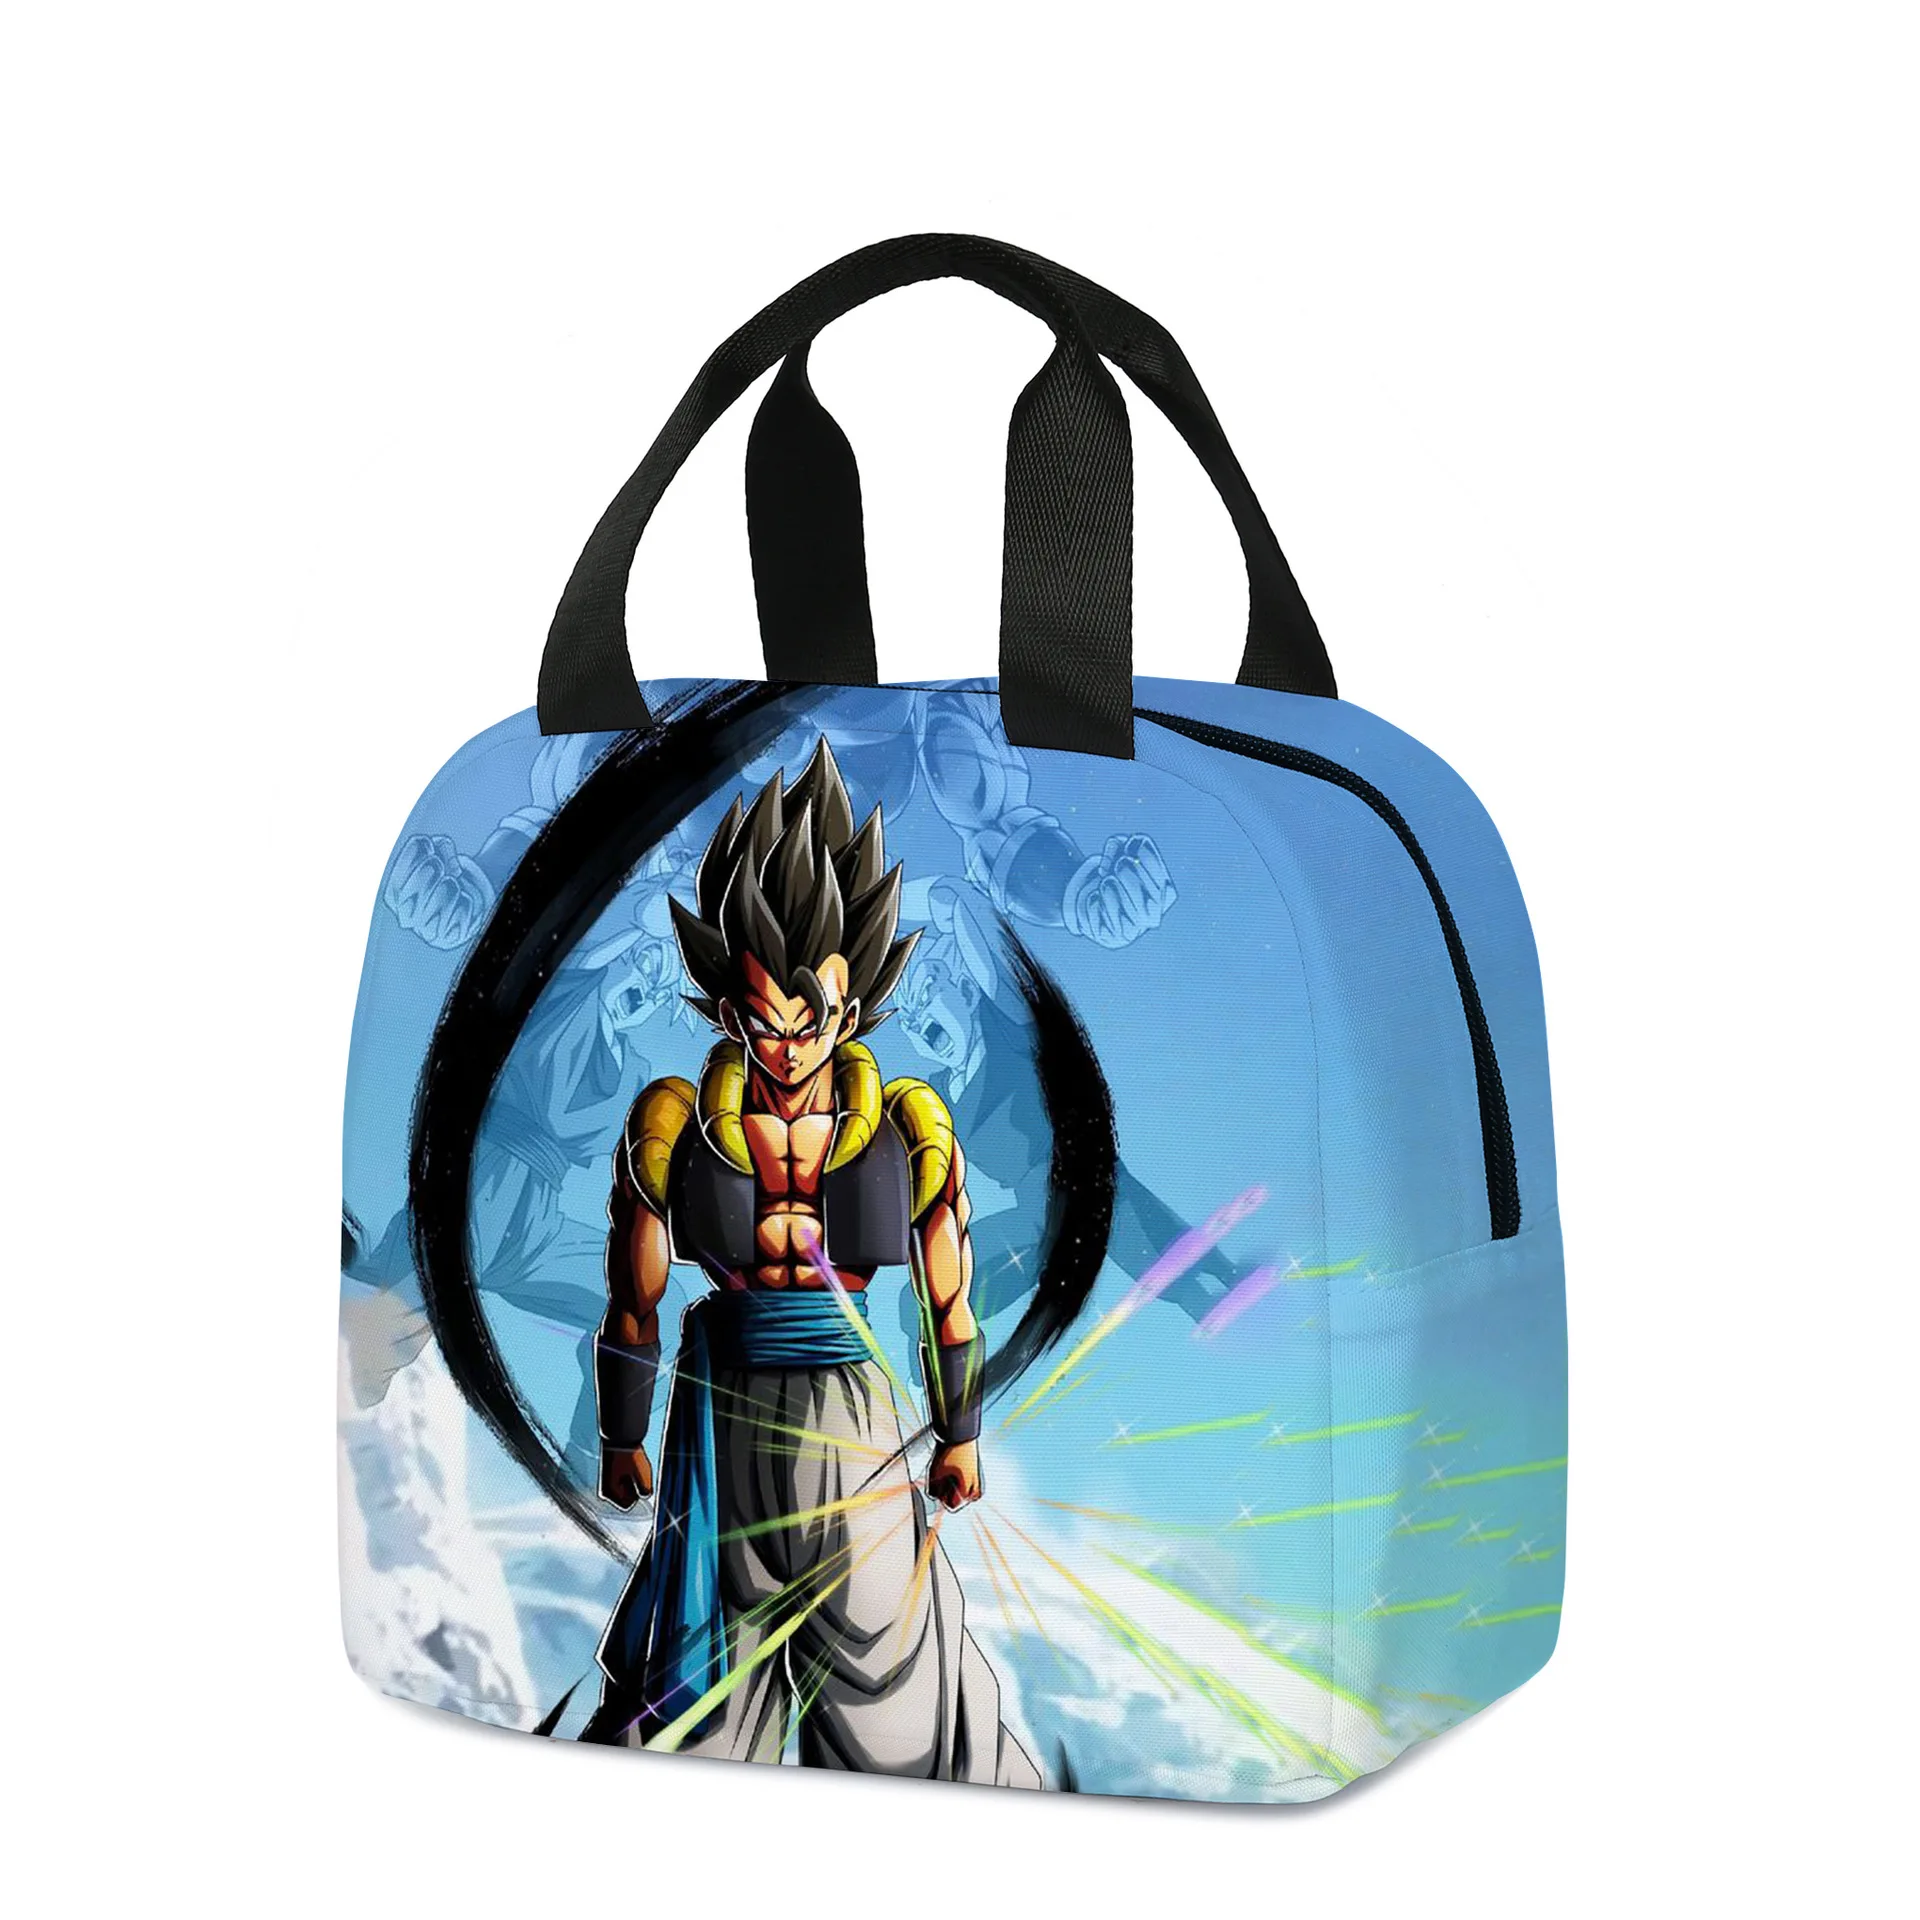 Blue Backpack for Children 4 to 6 years old - Parody Dragon Ball Z - DBZ -  Son Goku evolutionary theory (High quality children's schoolbag - printed  in France)